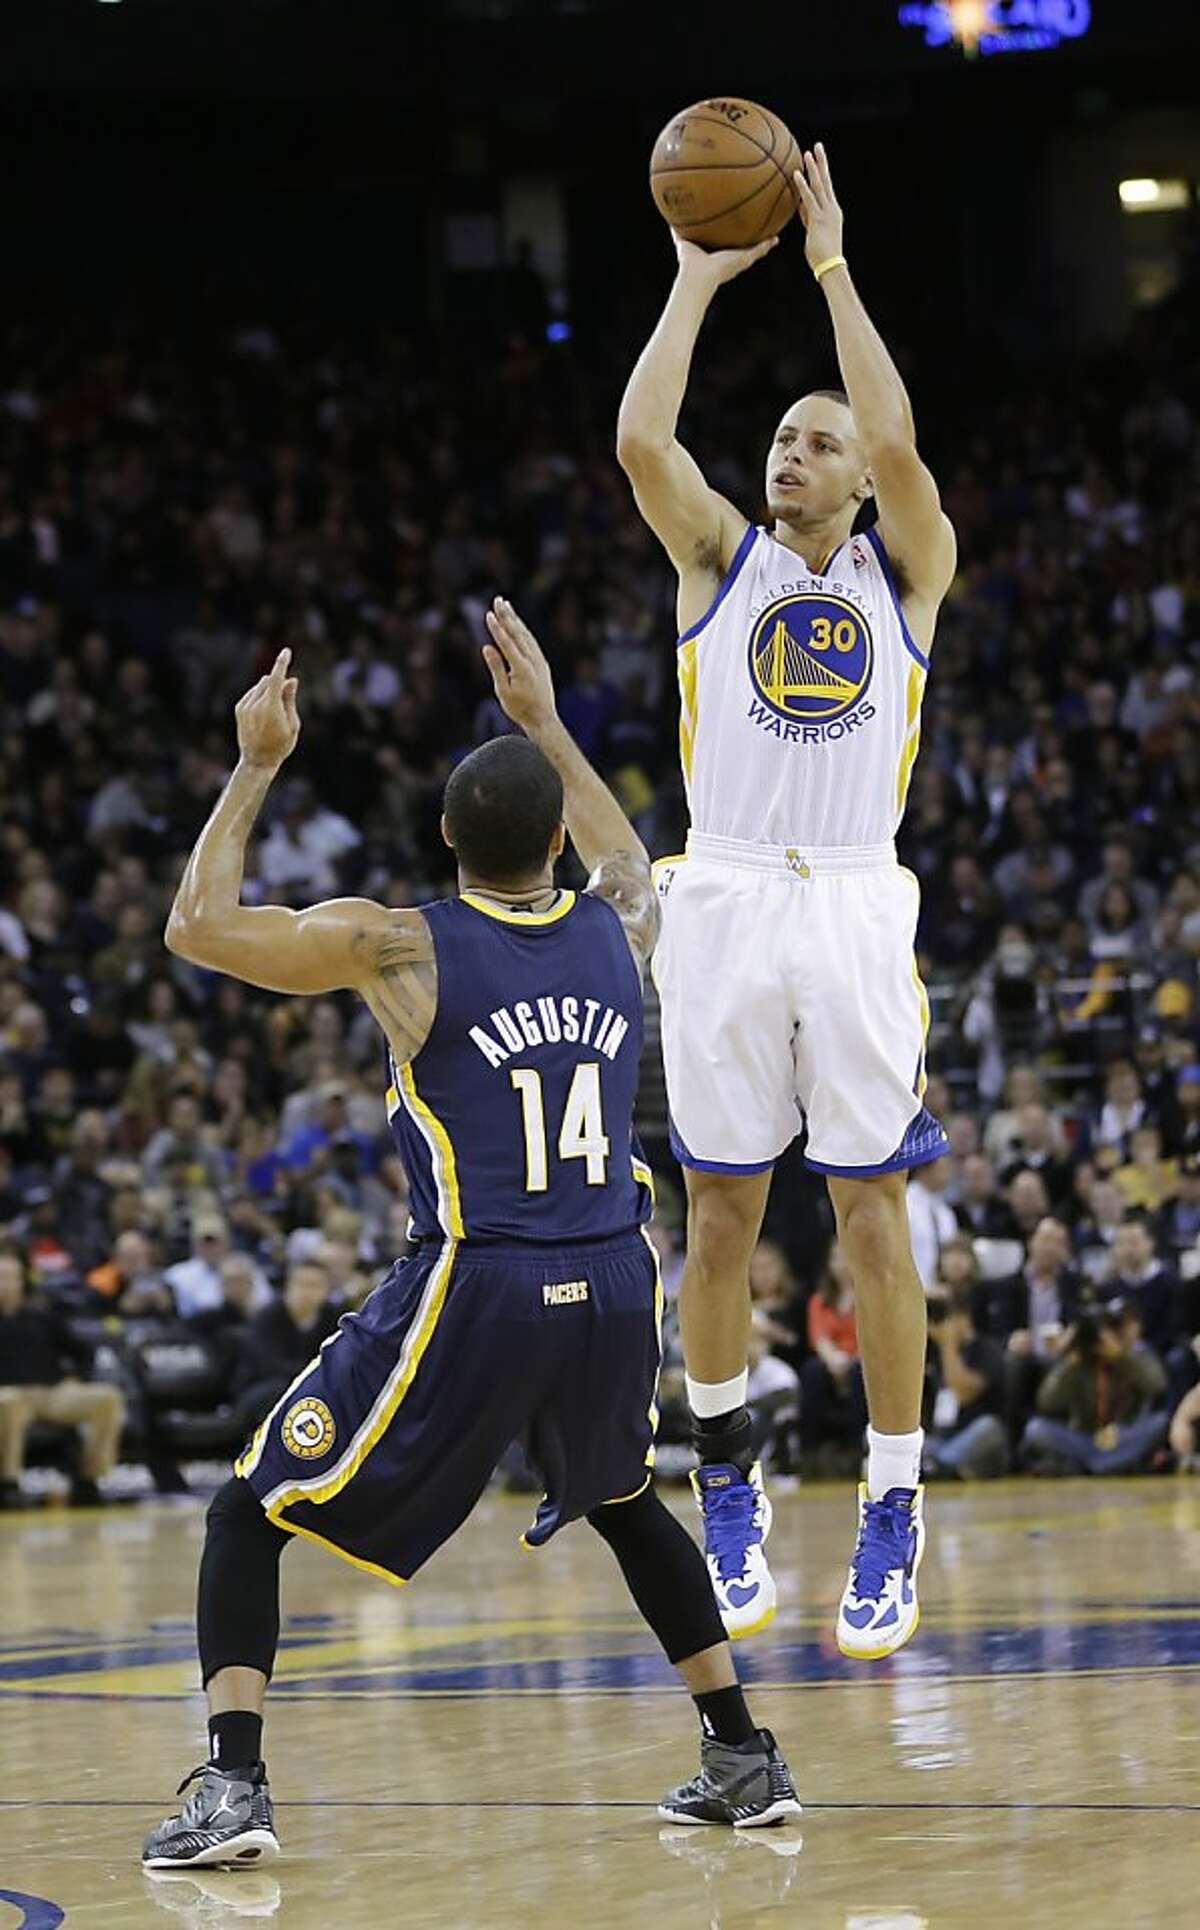 Golden State Warriors' Stephen Curry (30) shoots over Indiana Pacers' D.J. Augustin (14) during the first half of an NBA basketball game in Oakland, Calif., Saturday, Dec. 1, 2012. (AP Photo/Marcio Jose Sanchez)